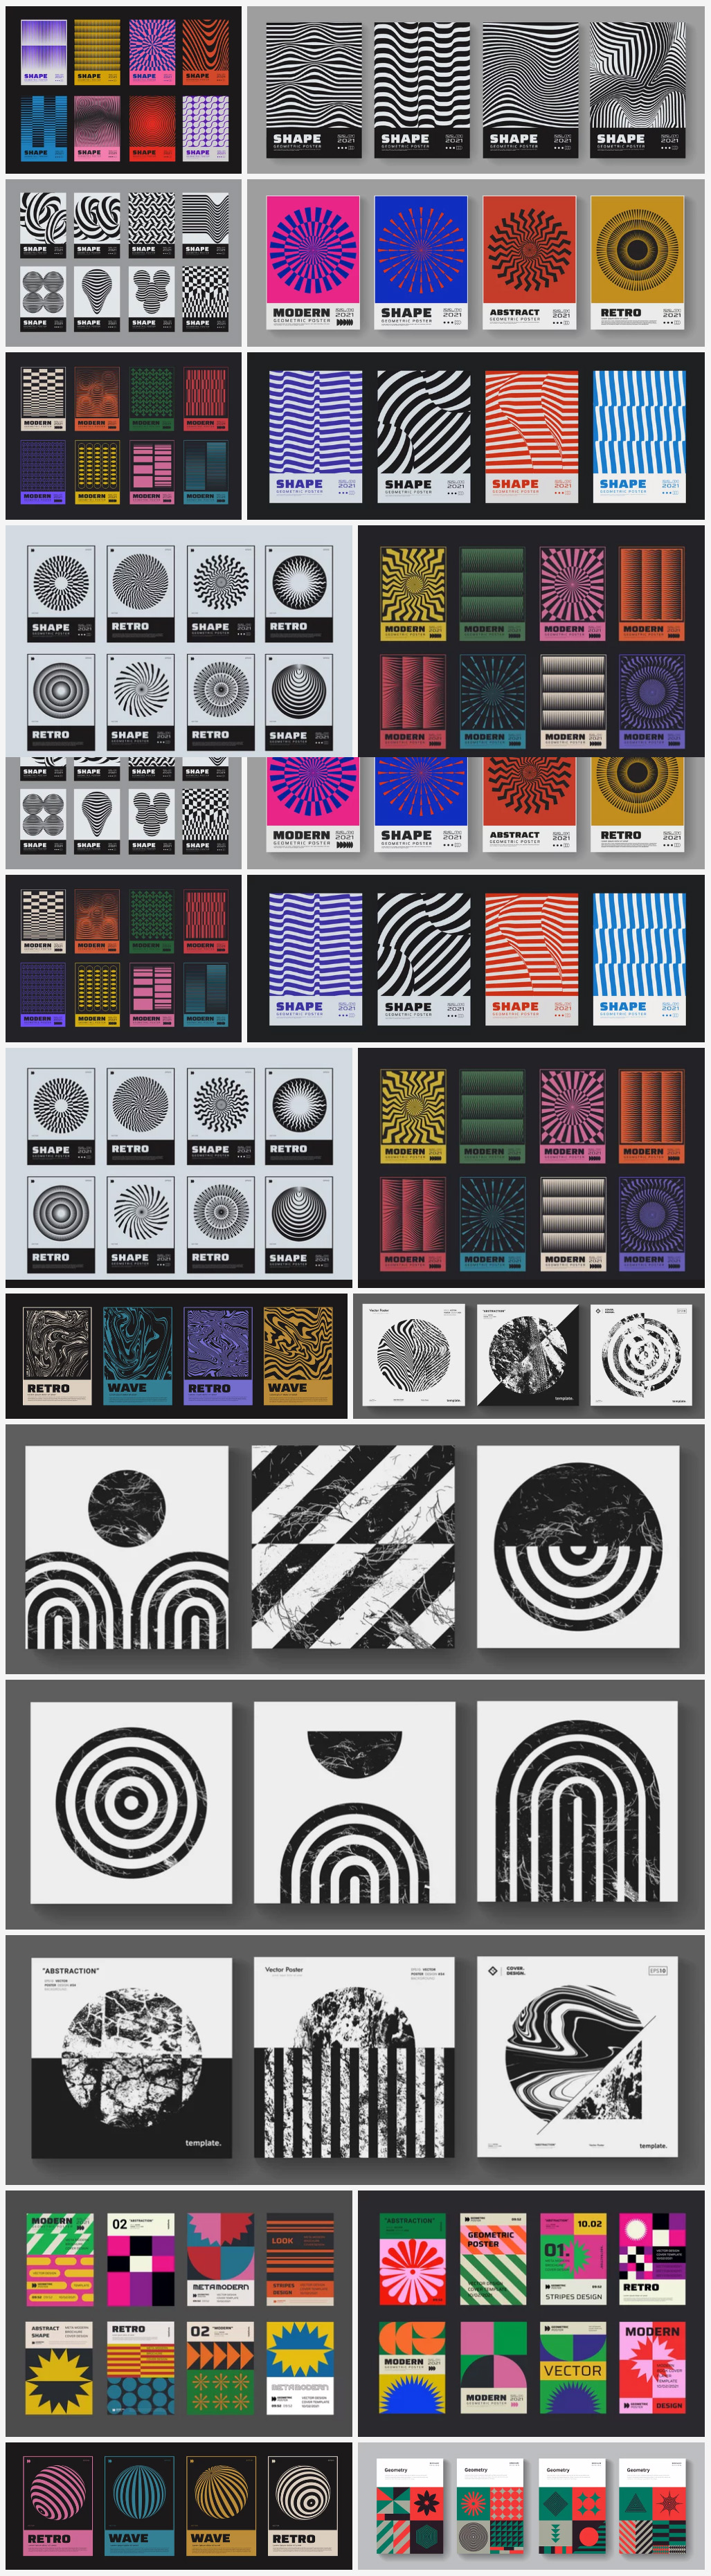 Swiss graphic design-inspired abstract geometric graphics for posters.